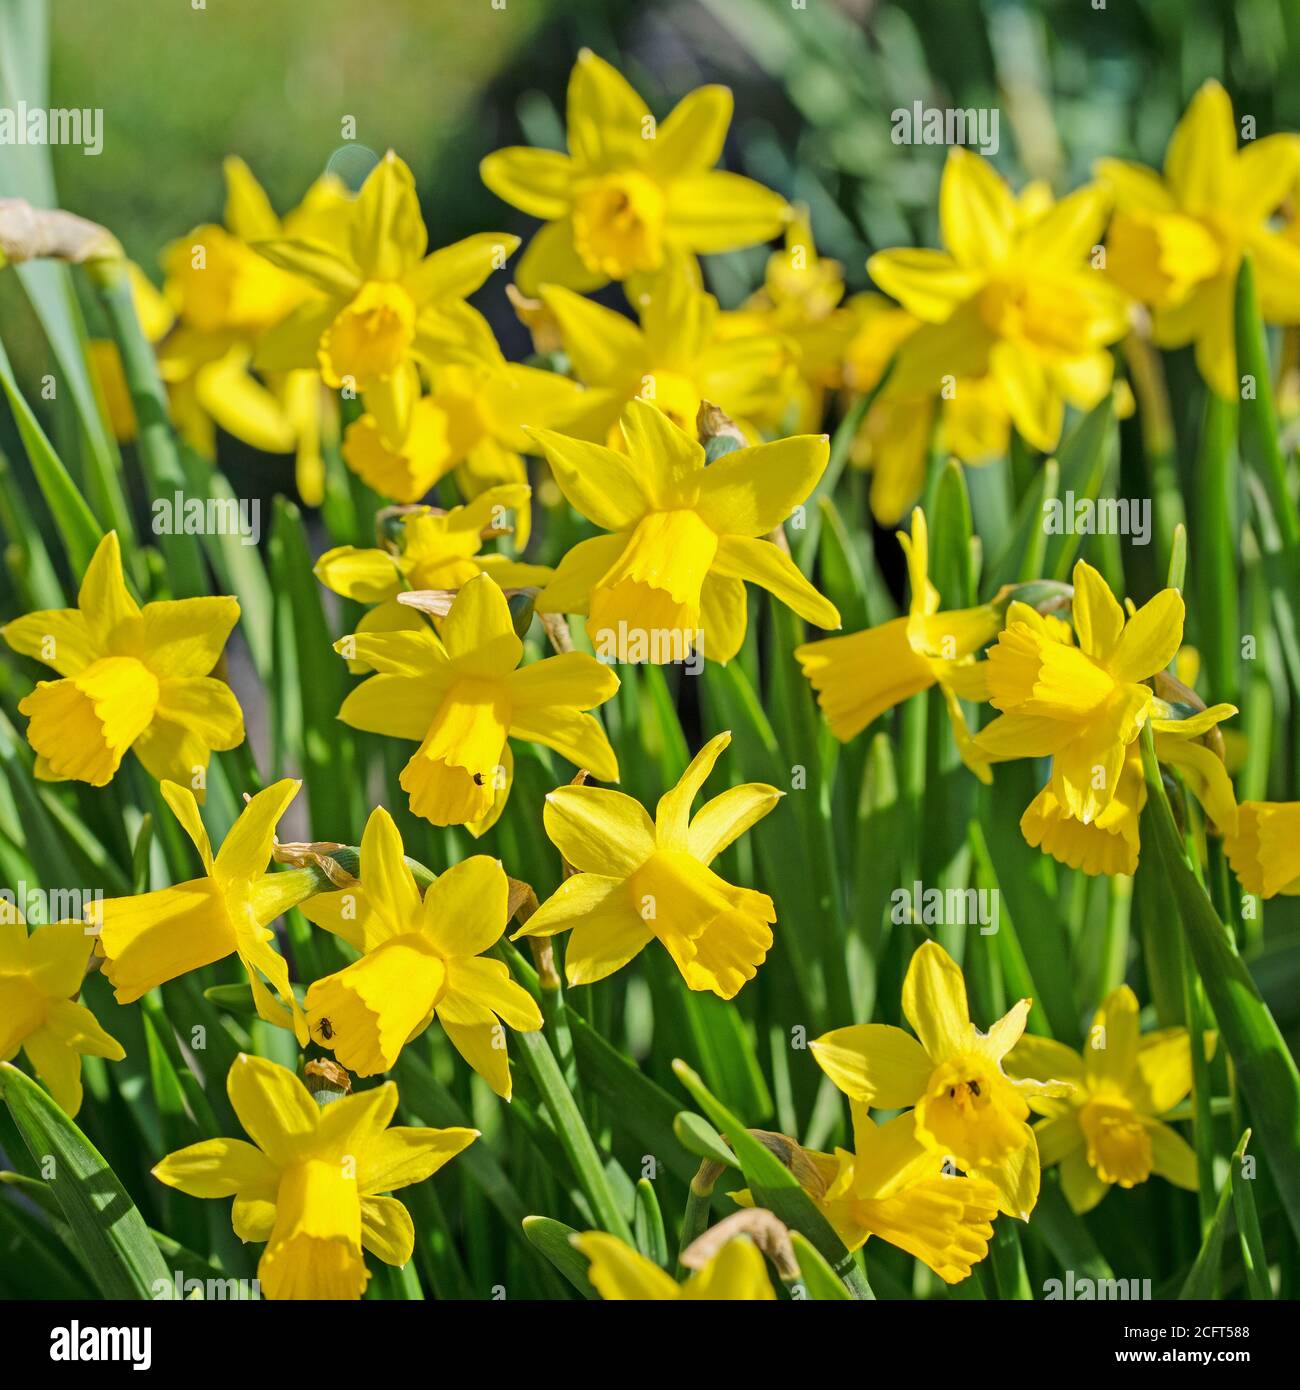 Blooming yellow daffodils in spring Stock Photo